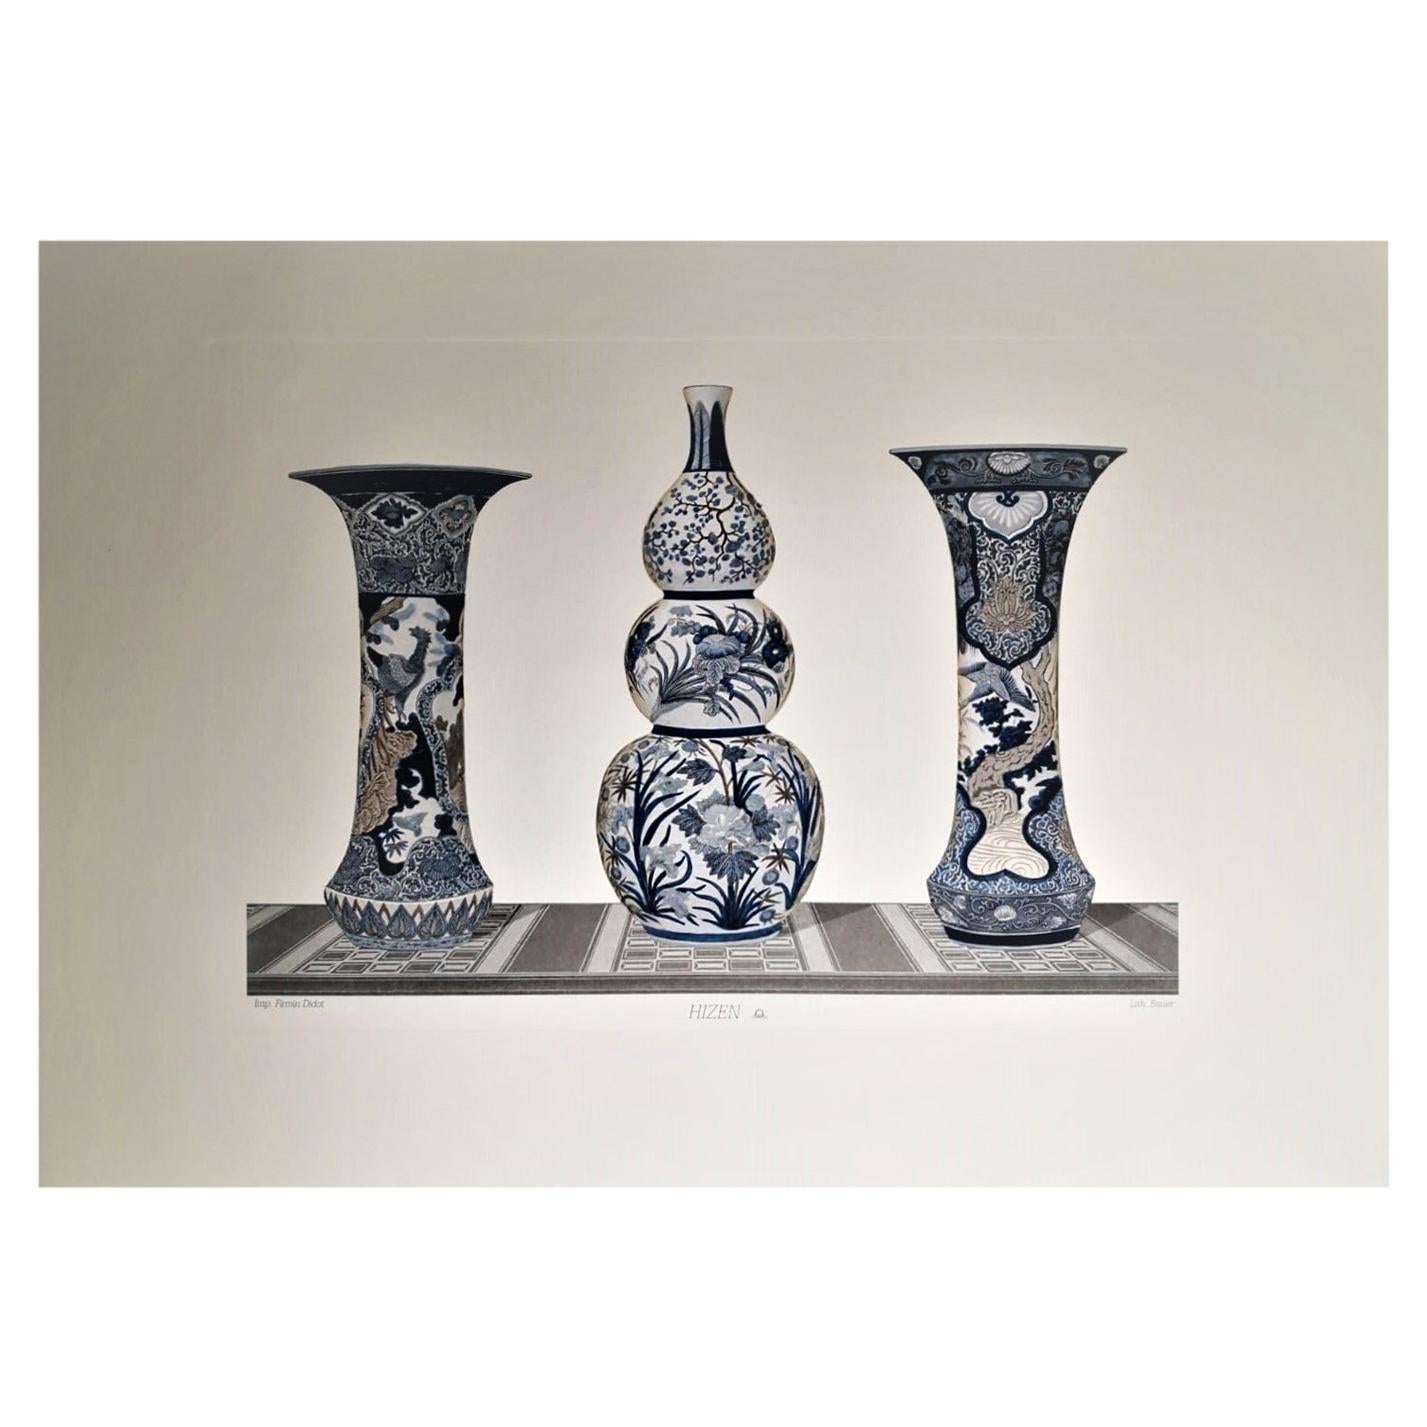 Italian Blue Grey and White Hand Painted Japanese "HIZEN" Vases Print For Sale